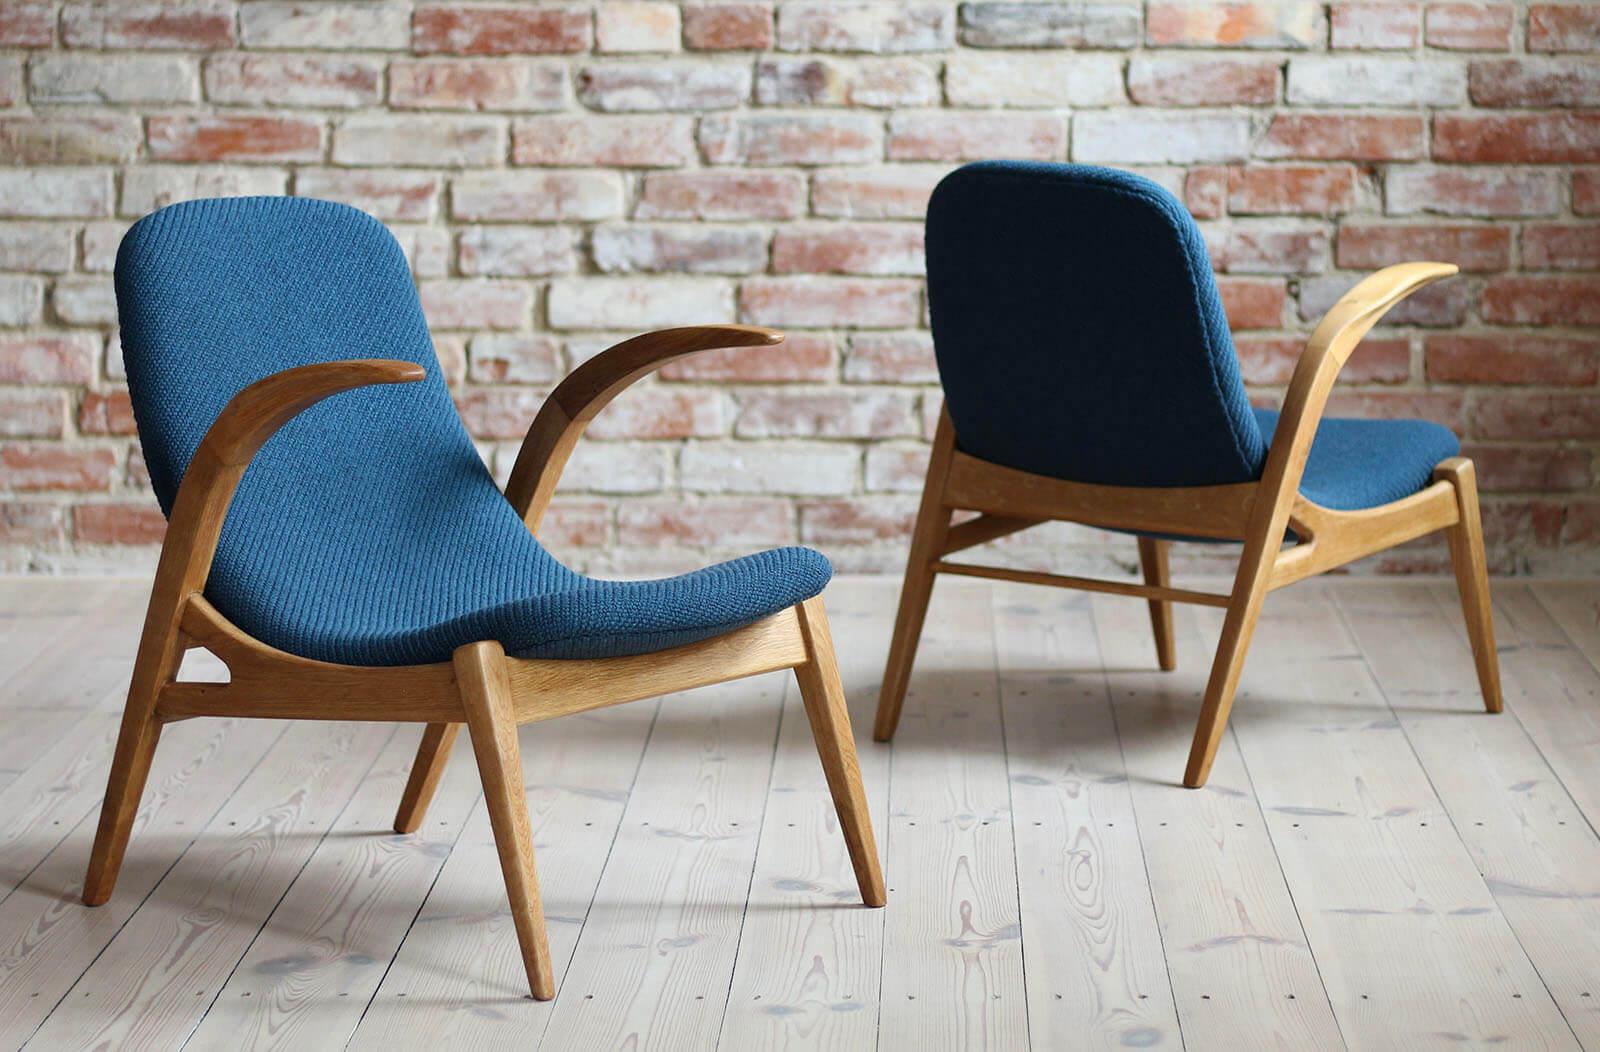 Oiled Set of 2 Midcentury Lounge Chairs, 1960s, Czech Republic